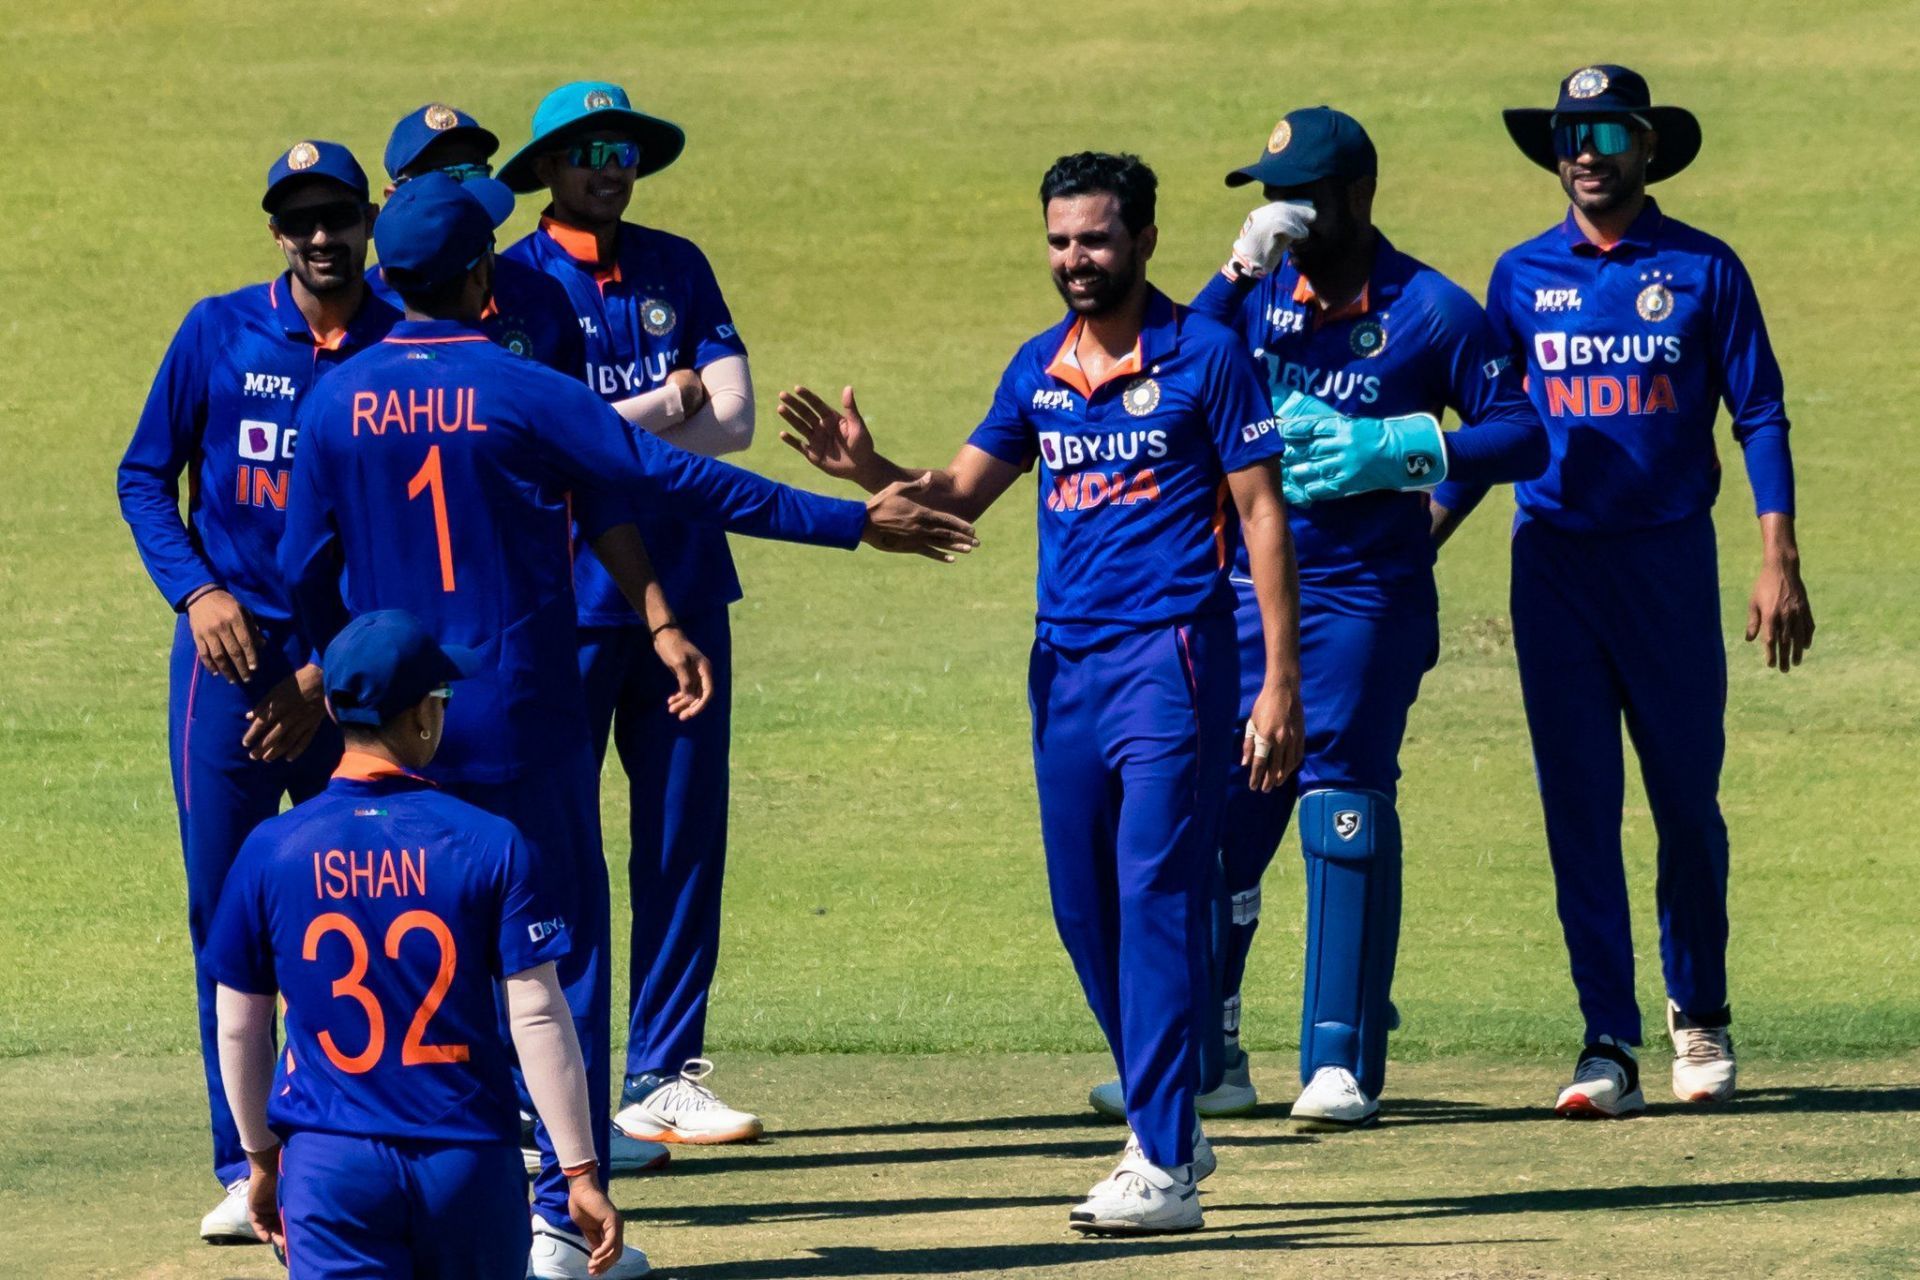 India annihilated Zimbabwe in the first ODI on Thursday